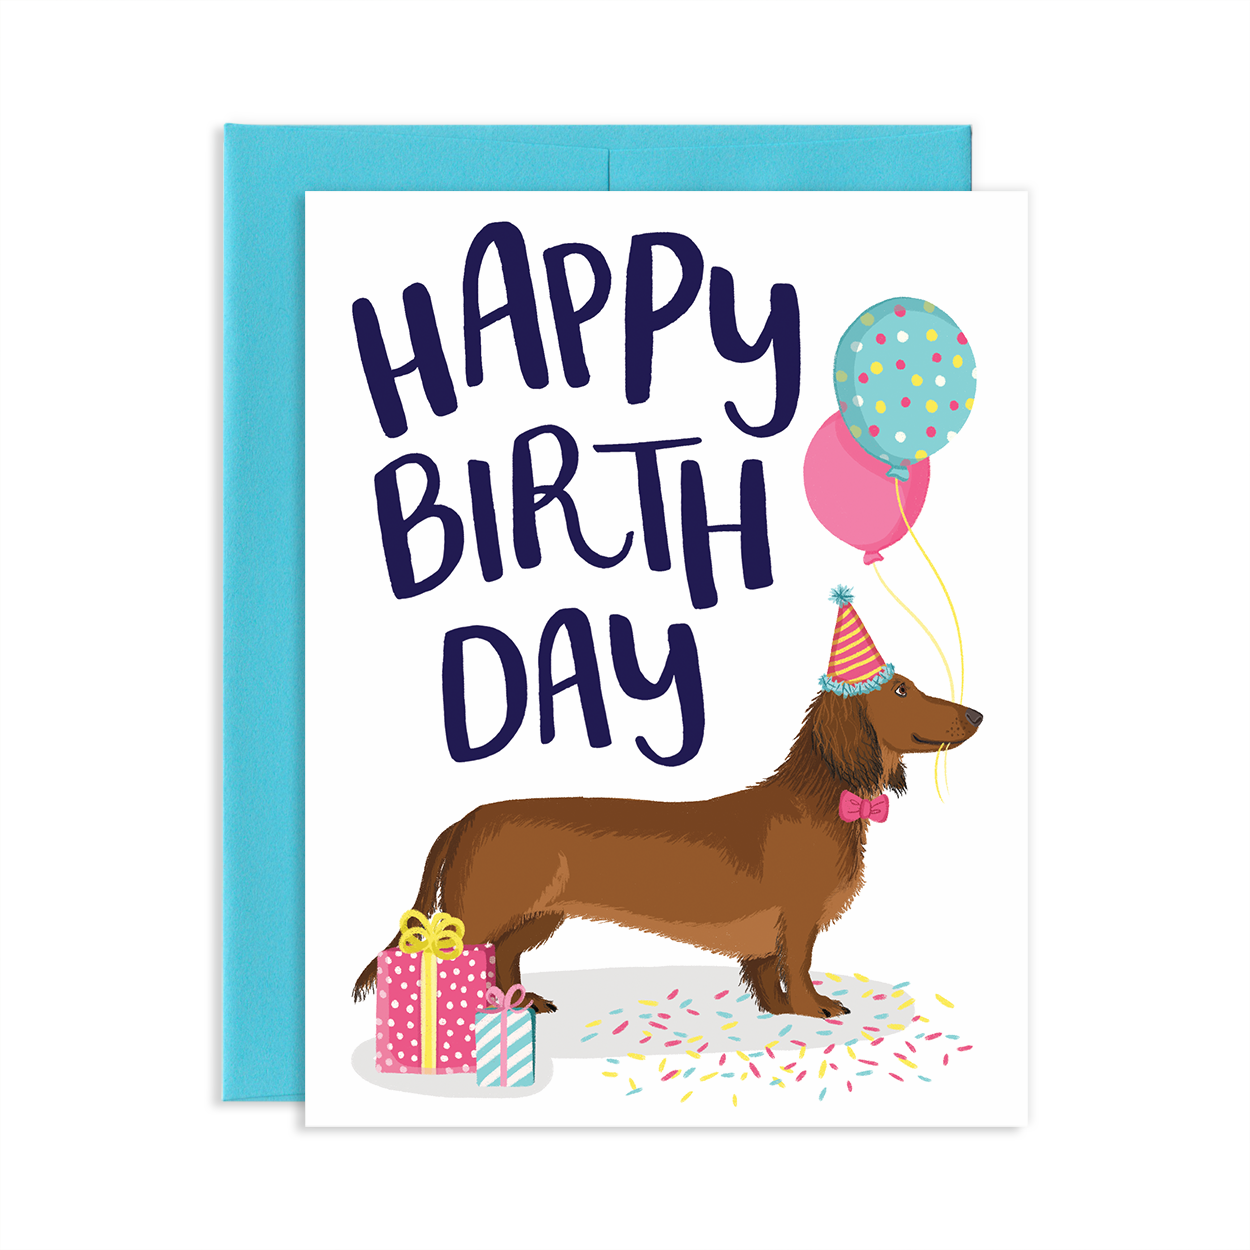 Adorable Cats & Dogs Greeting Card + Pen Bundle